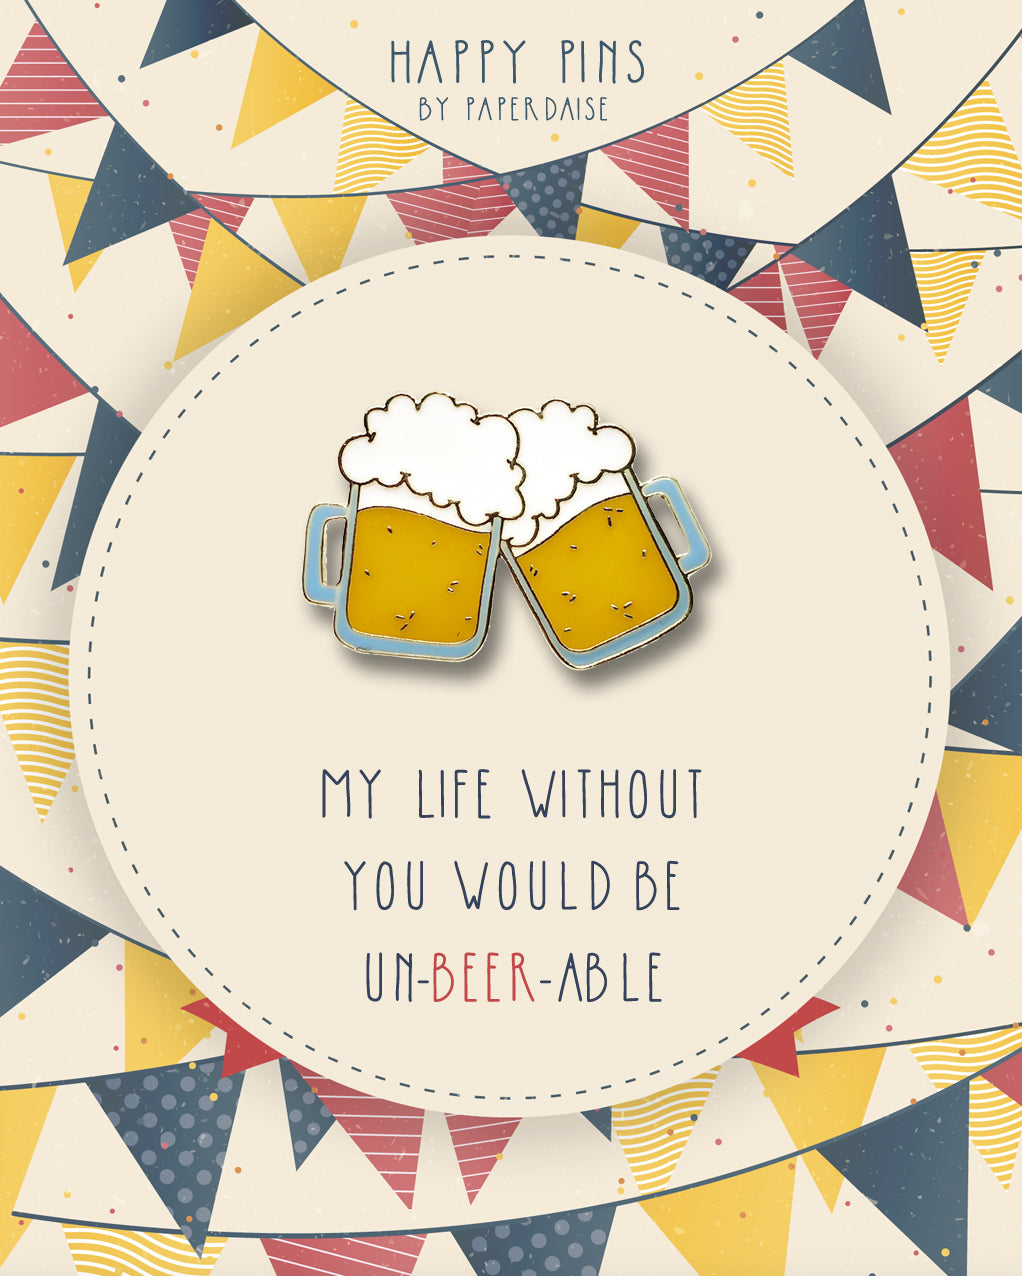 Life Without You Unbearable Beer Pin - LM